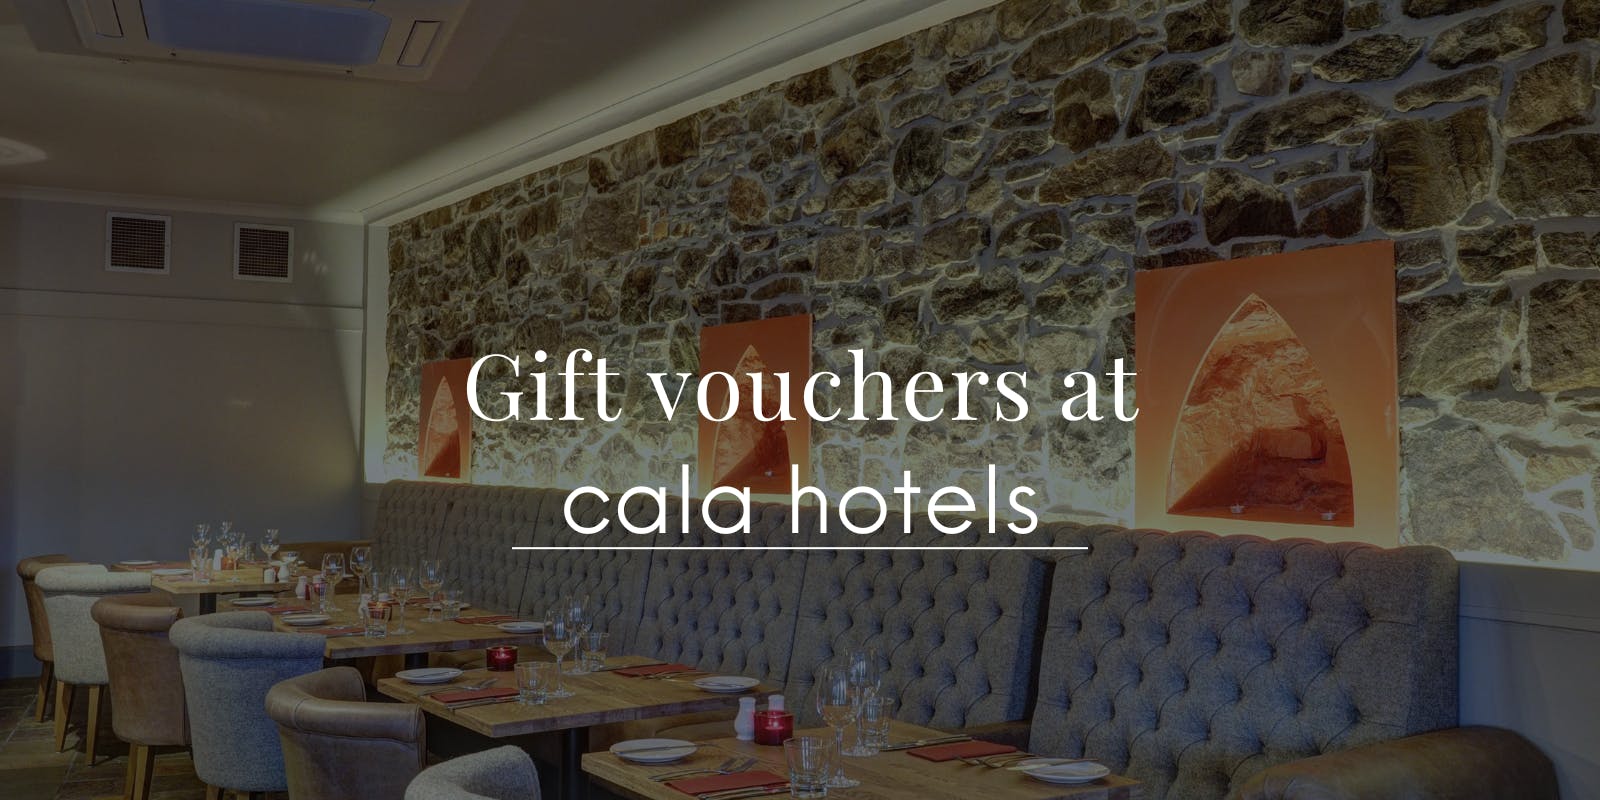 Gift vouchers are availabe at the Cala Hotels